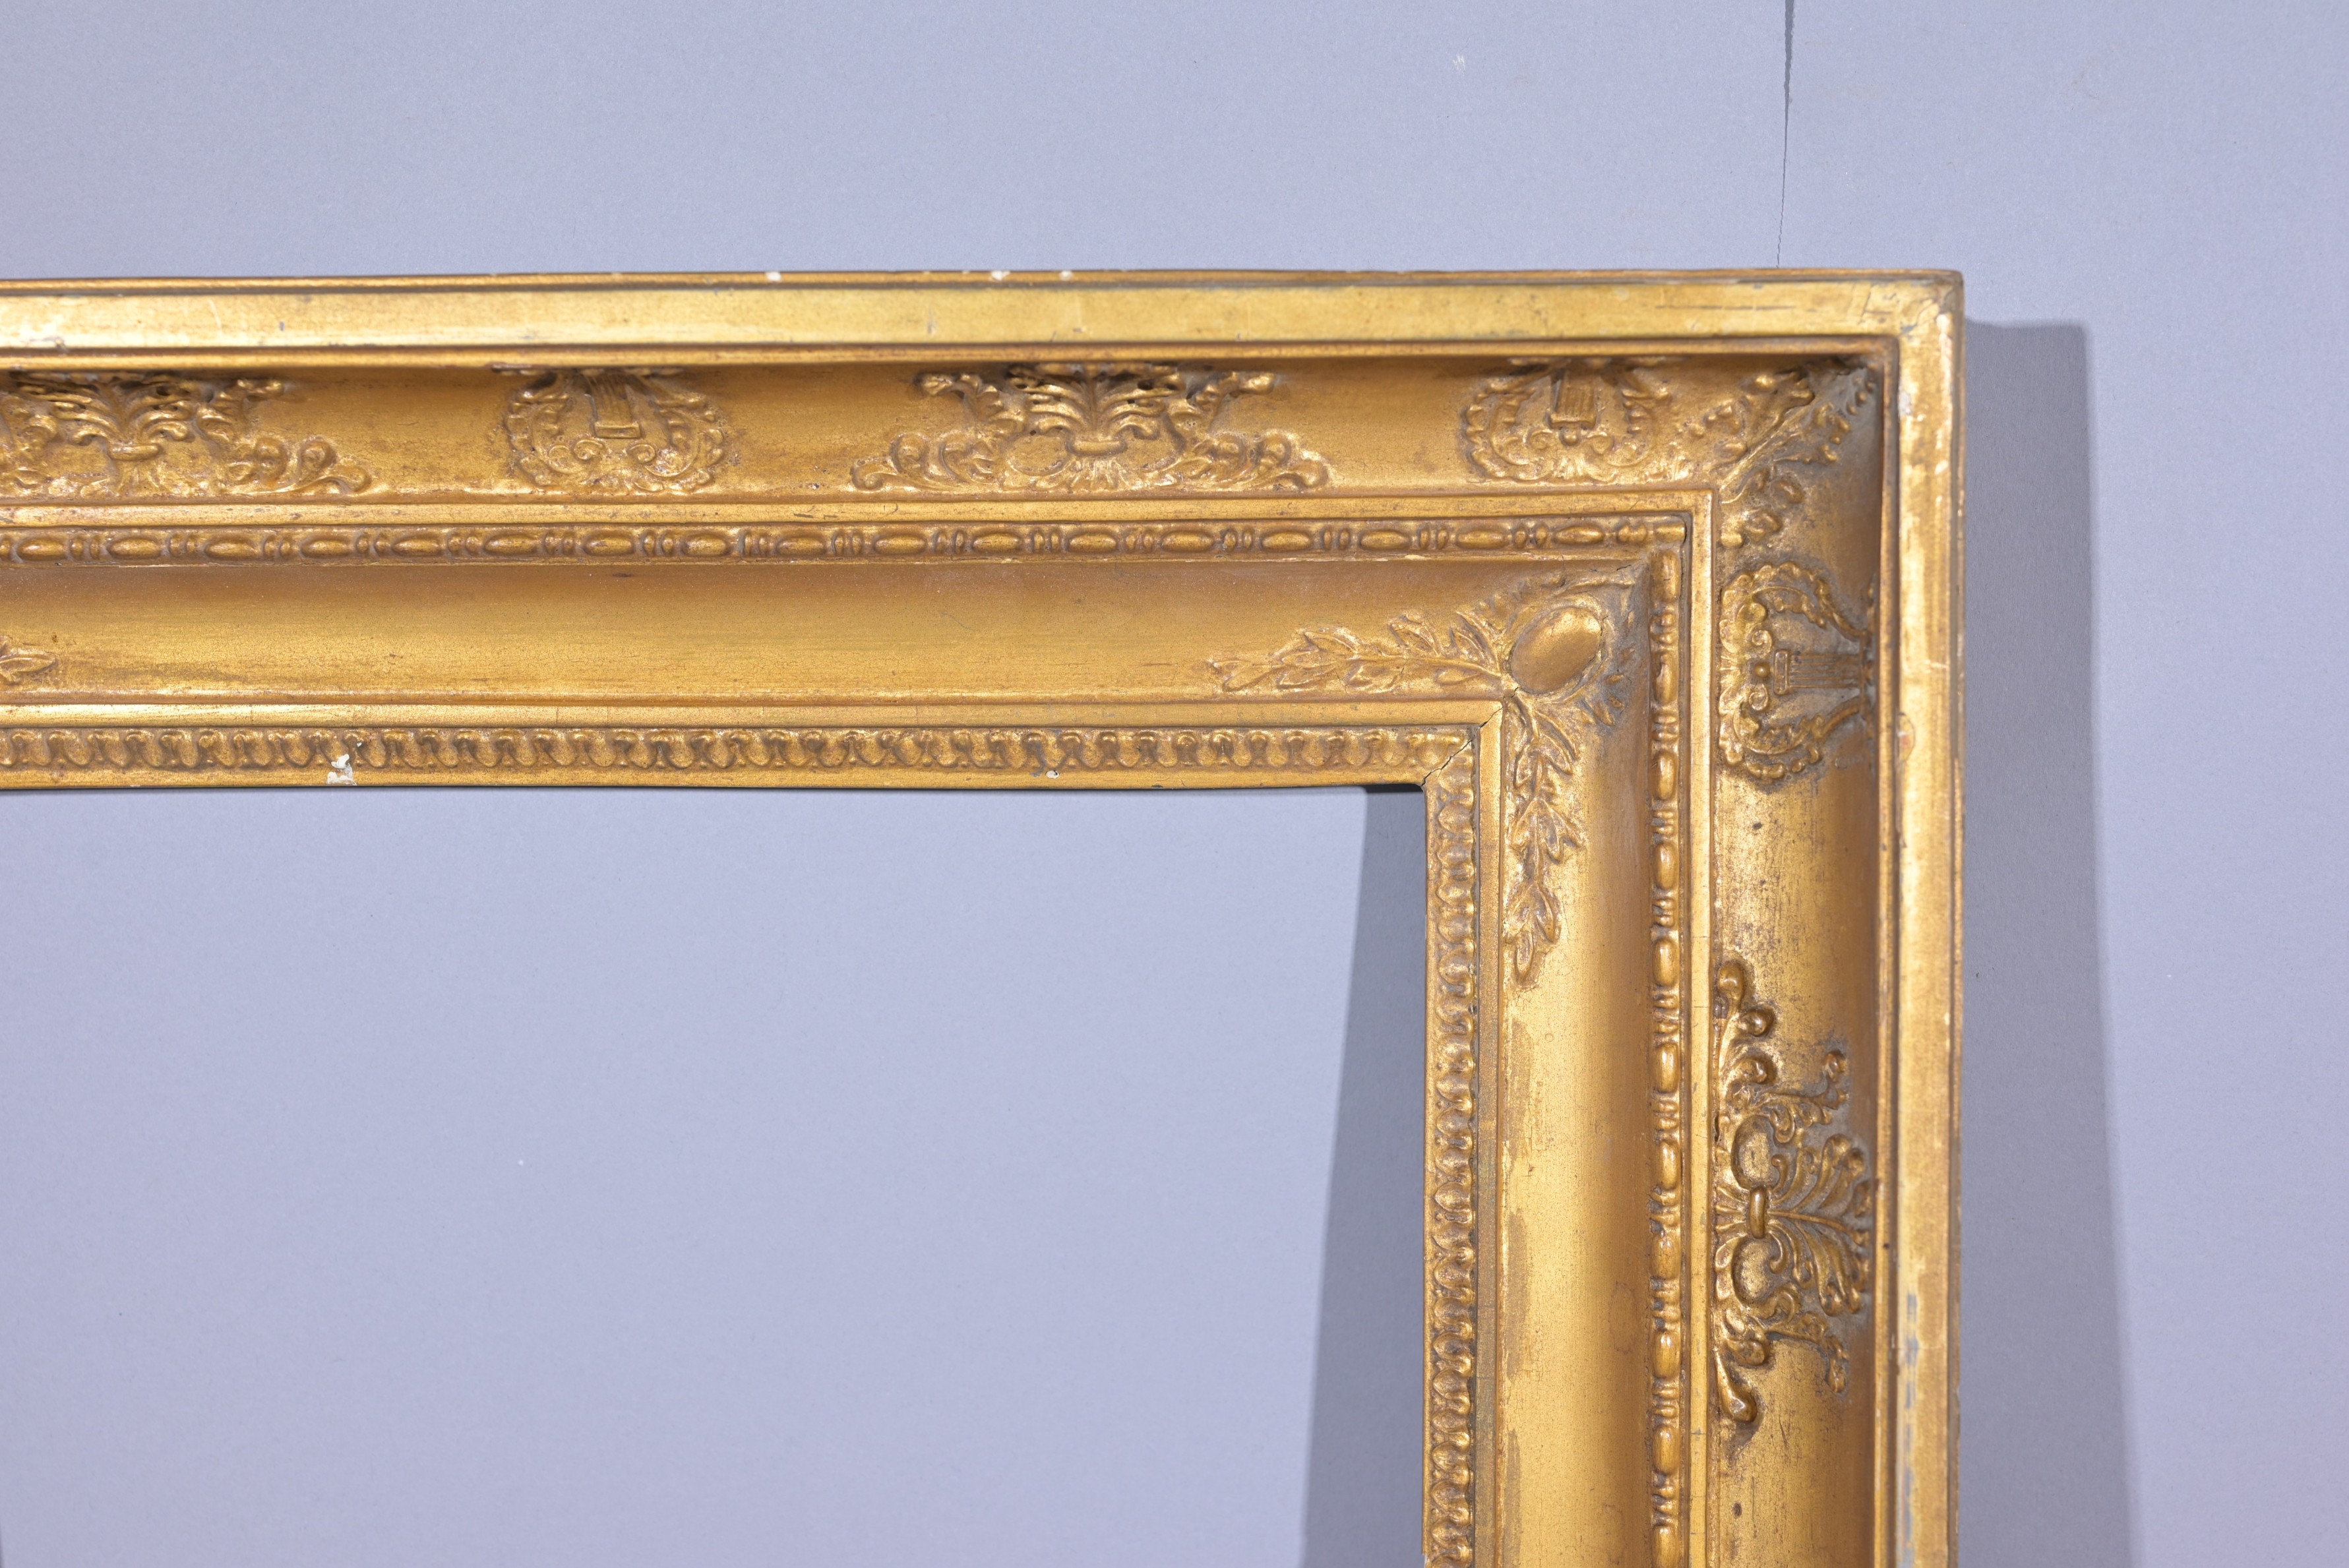 Ameican Gilt/Wood Frame- 16 x 13 - Image 3 of 7